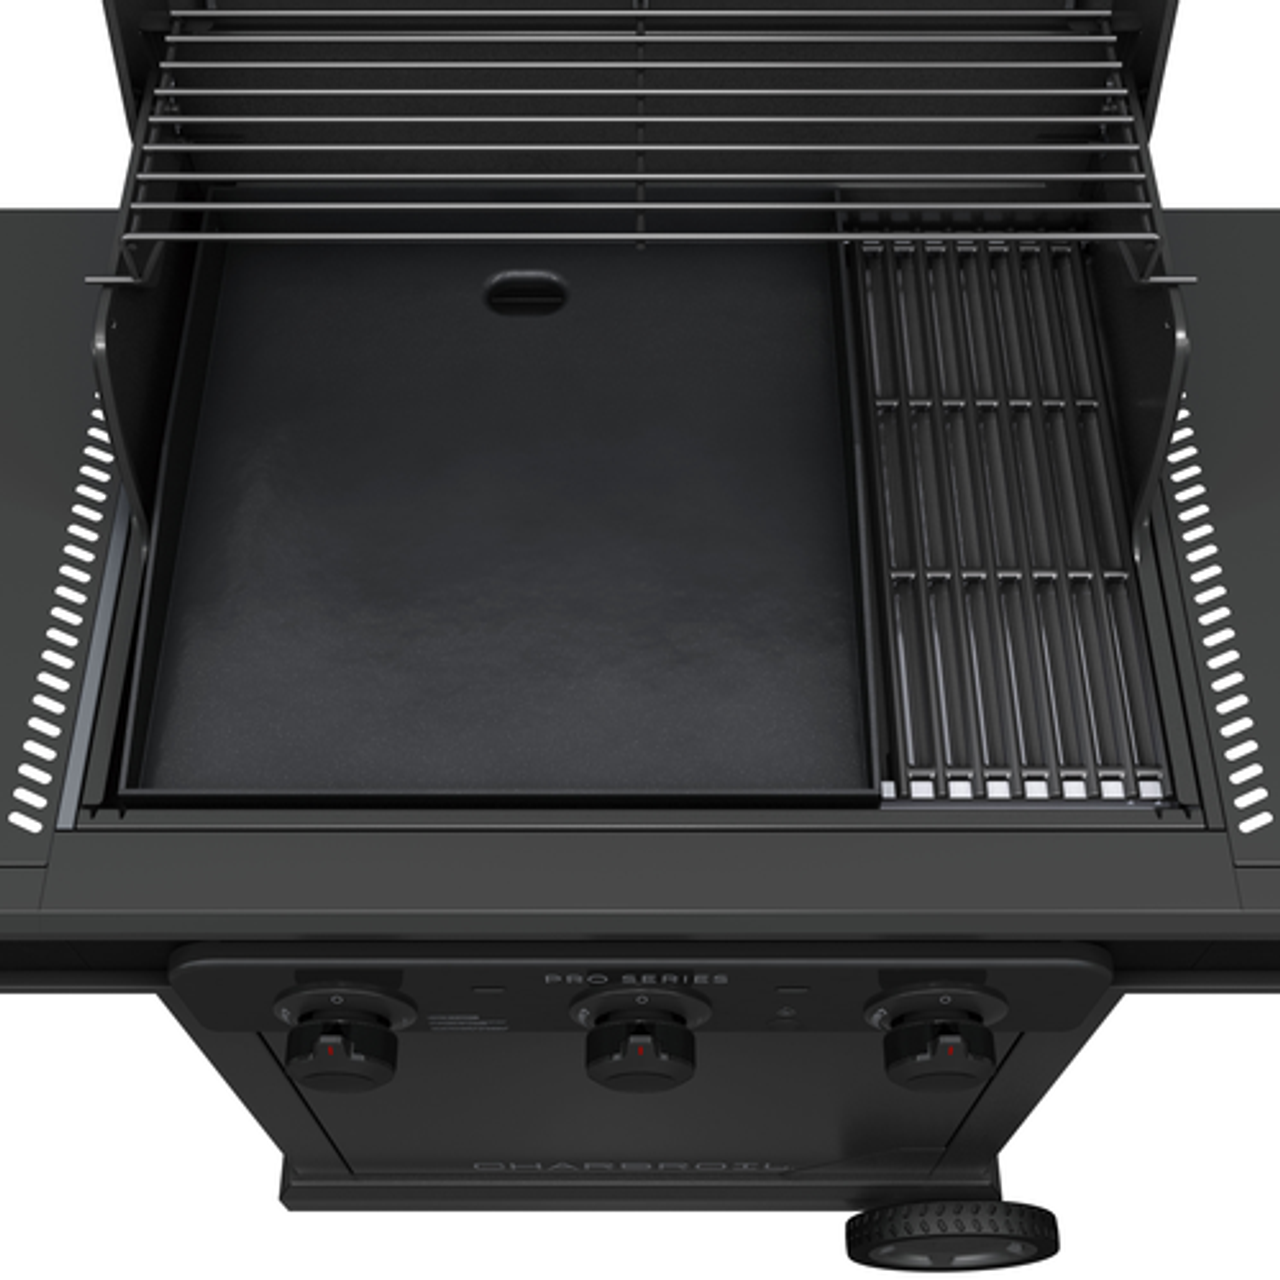 Char-Broil - Pro Series with Amplifire™ Infrared Technology 3-Burner Propane Gas Grill Cabinet, 463365124 - Black